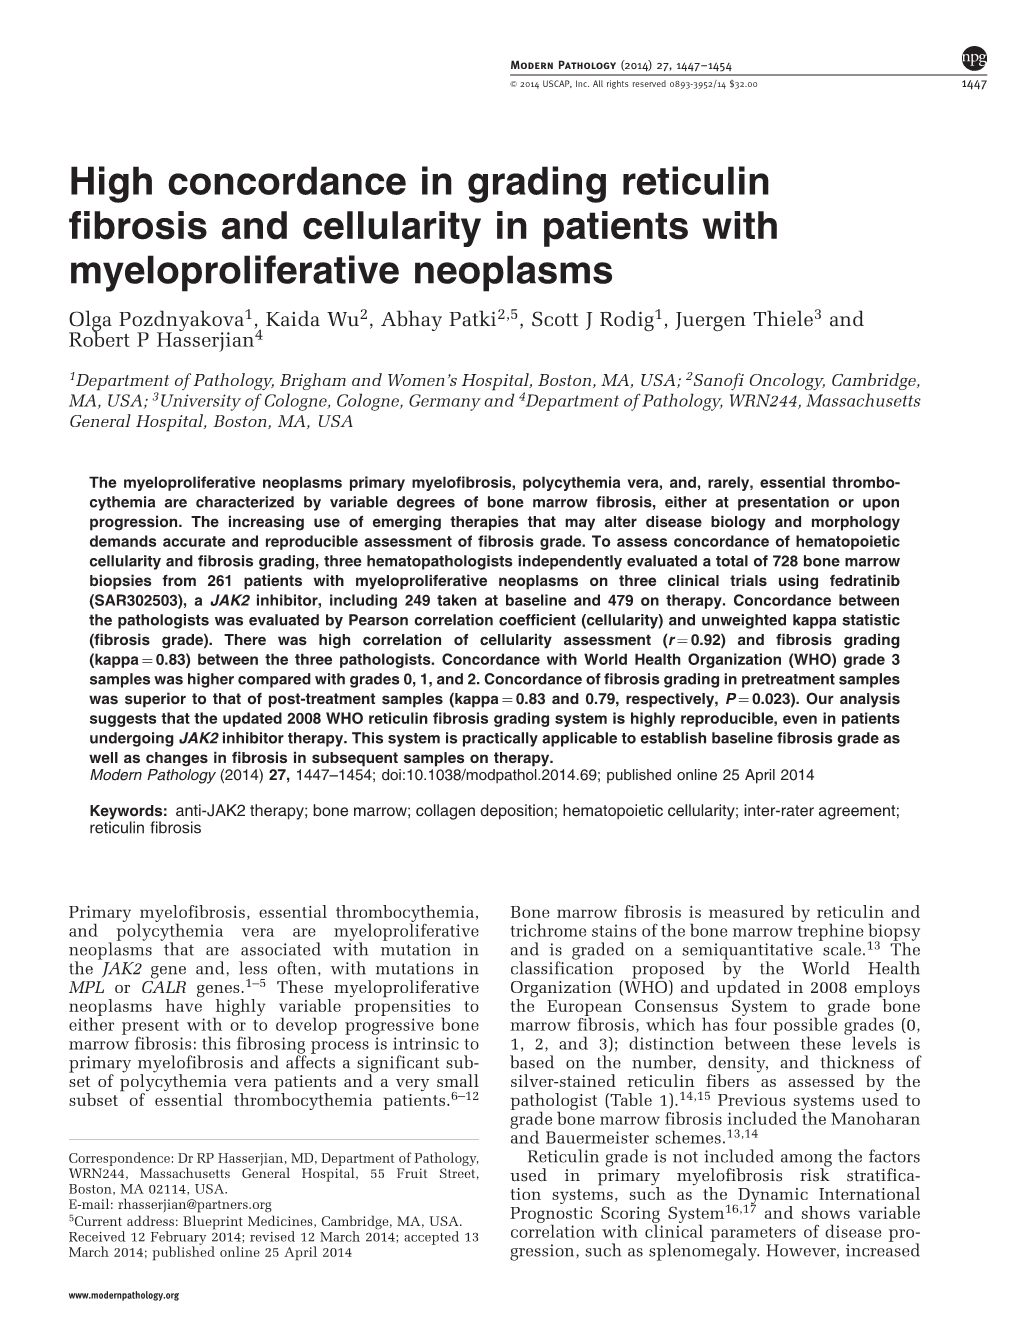 High Concordance in Grading Reticulin Fibrosis and Cellularity in Patients with Myeloproliferative Neoplasms